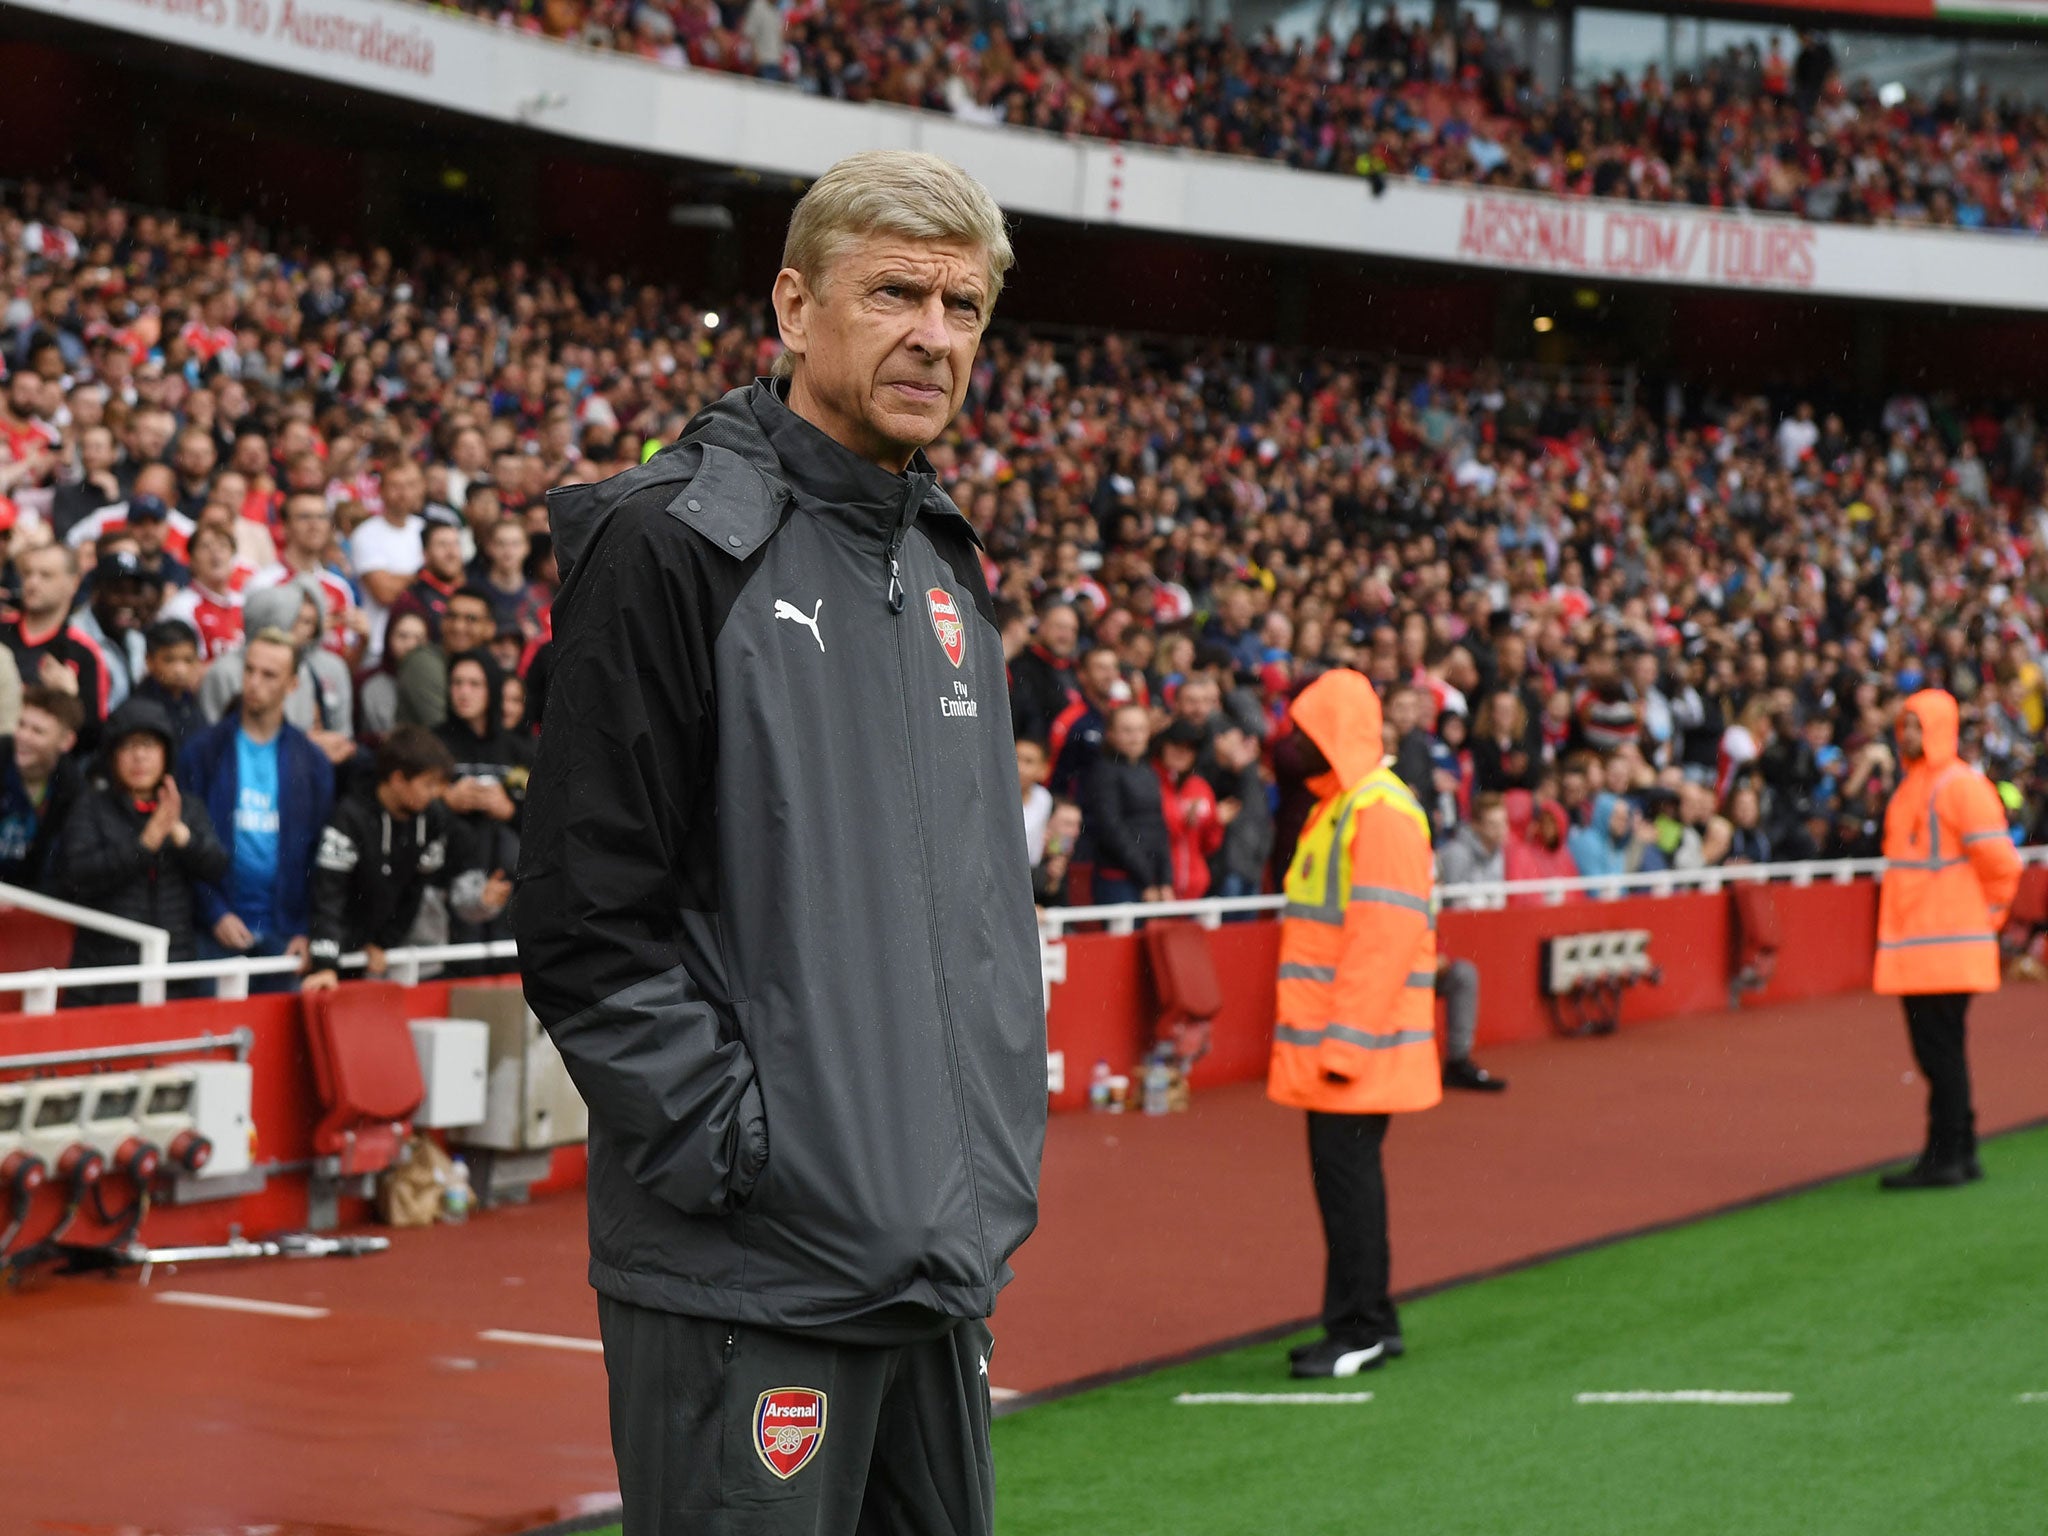 The Arsenal manager refused to address the controversy surrounding Arsenal's owner